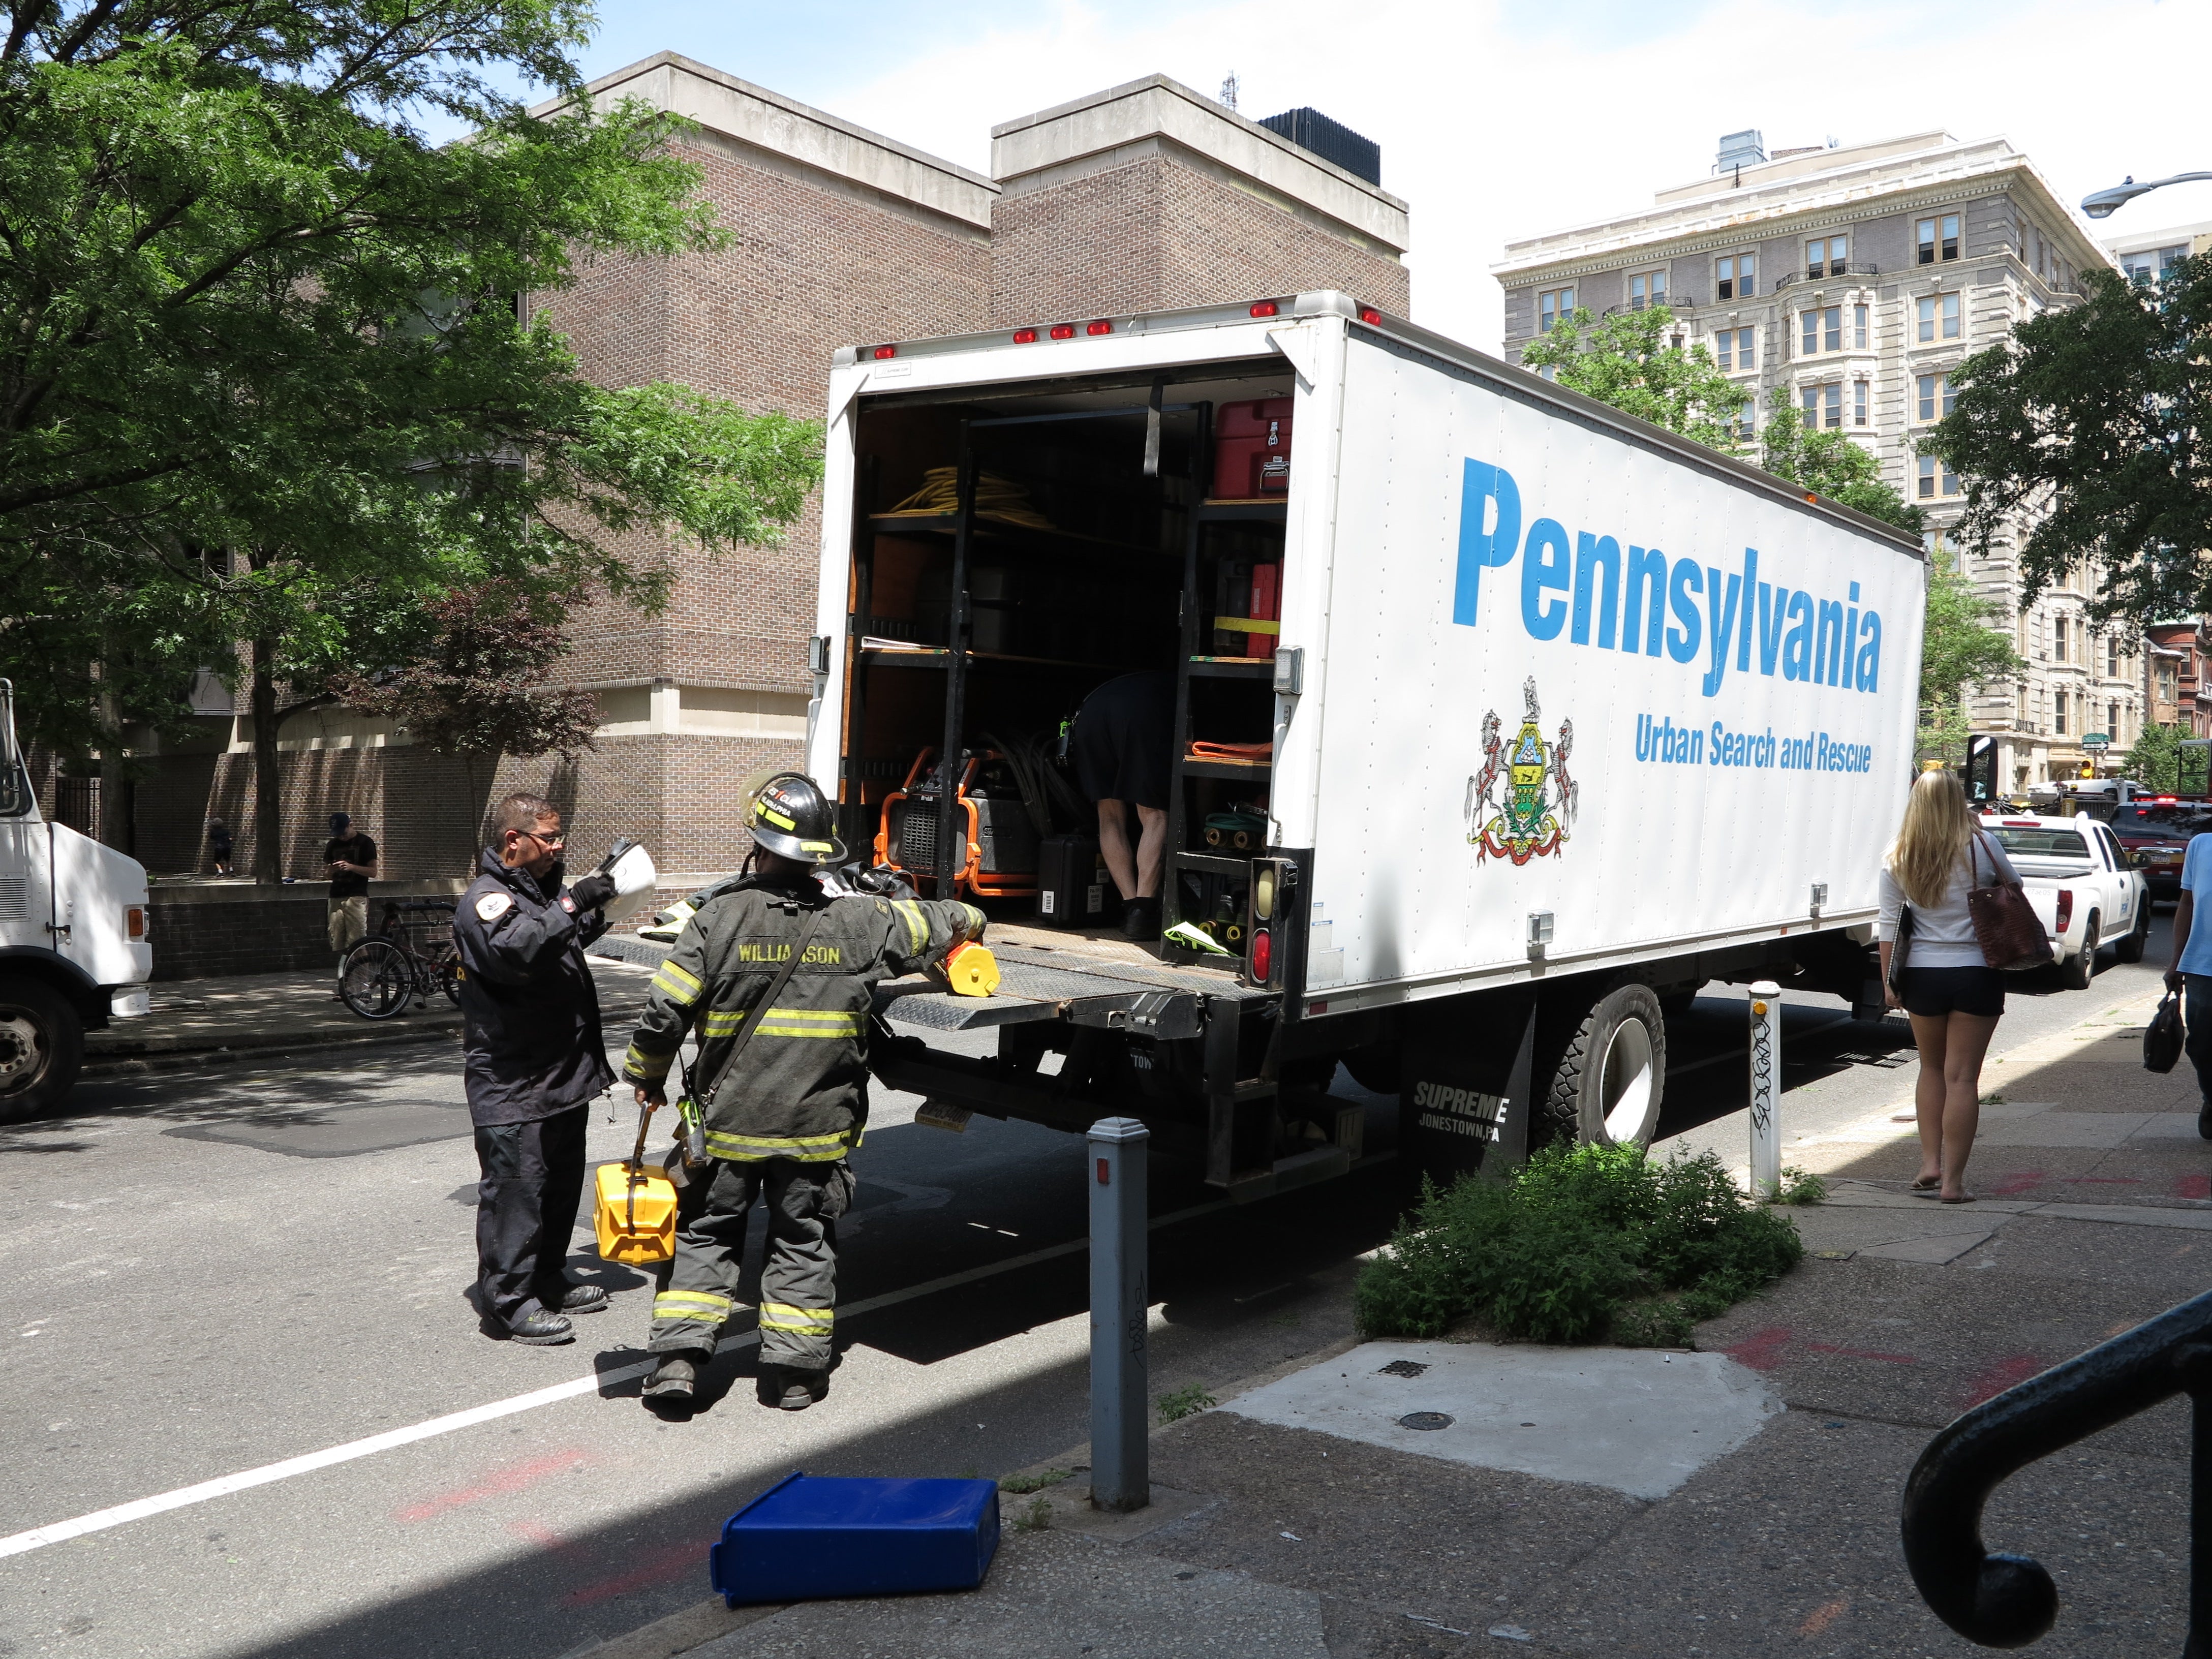 Pennsylvania Urban Search and Rescue was onsite within the hour.